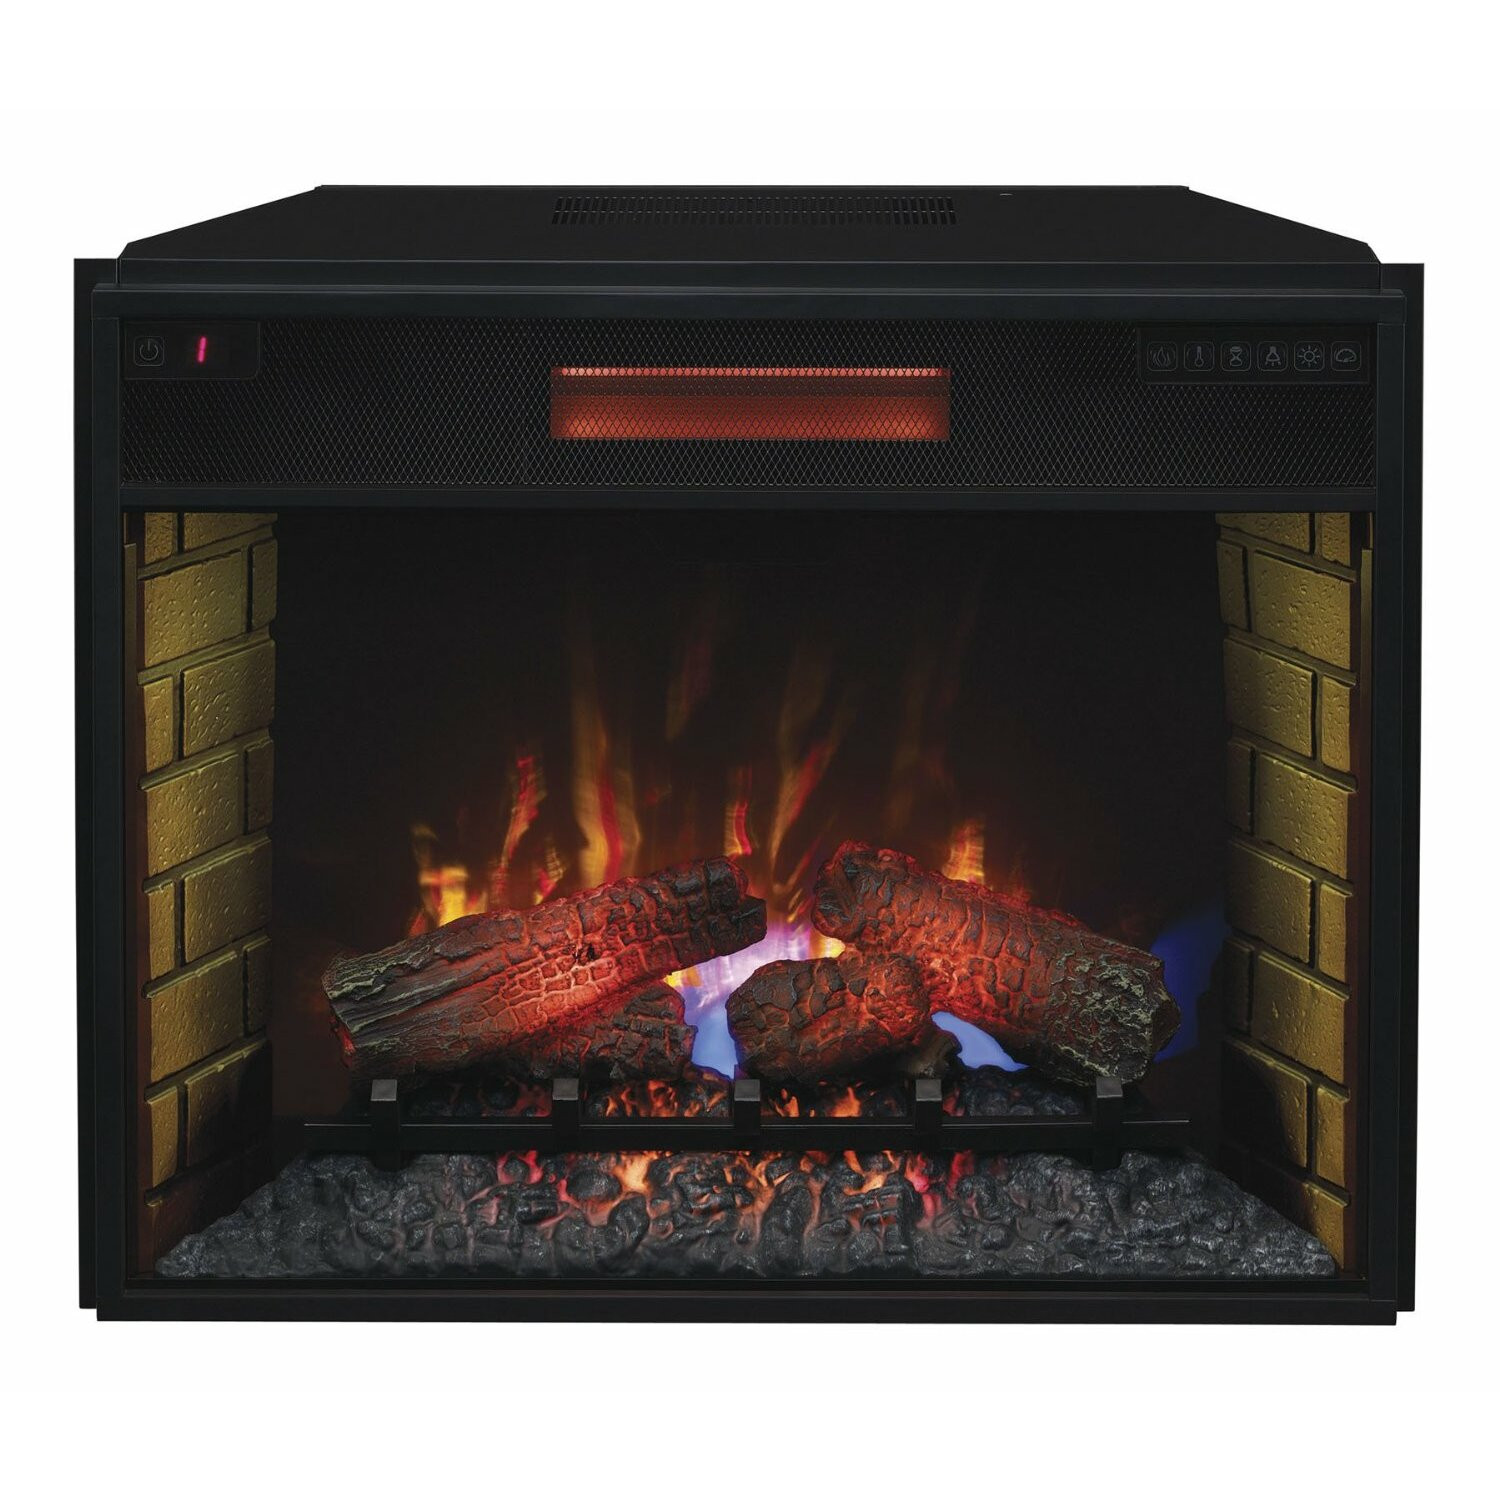 Classic Flame Electric Fireplace Insert
 Classic Flame Lakeland TV Stand Electric Fireplace Insert